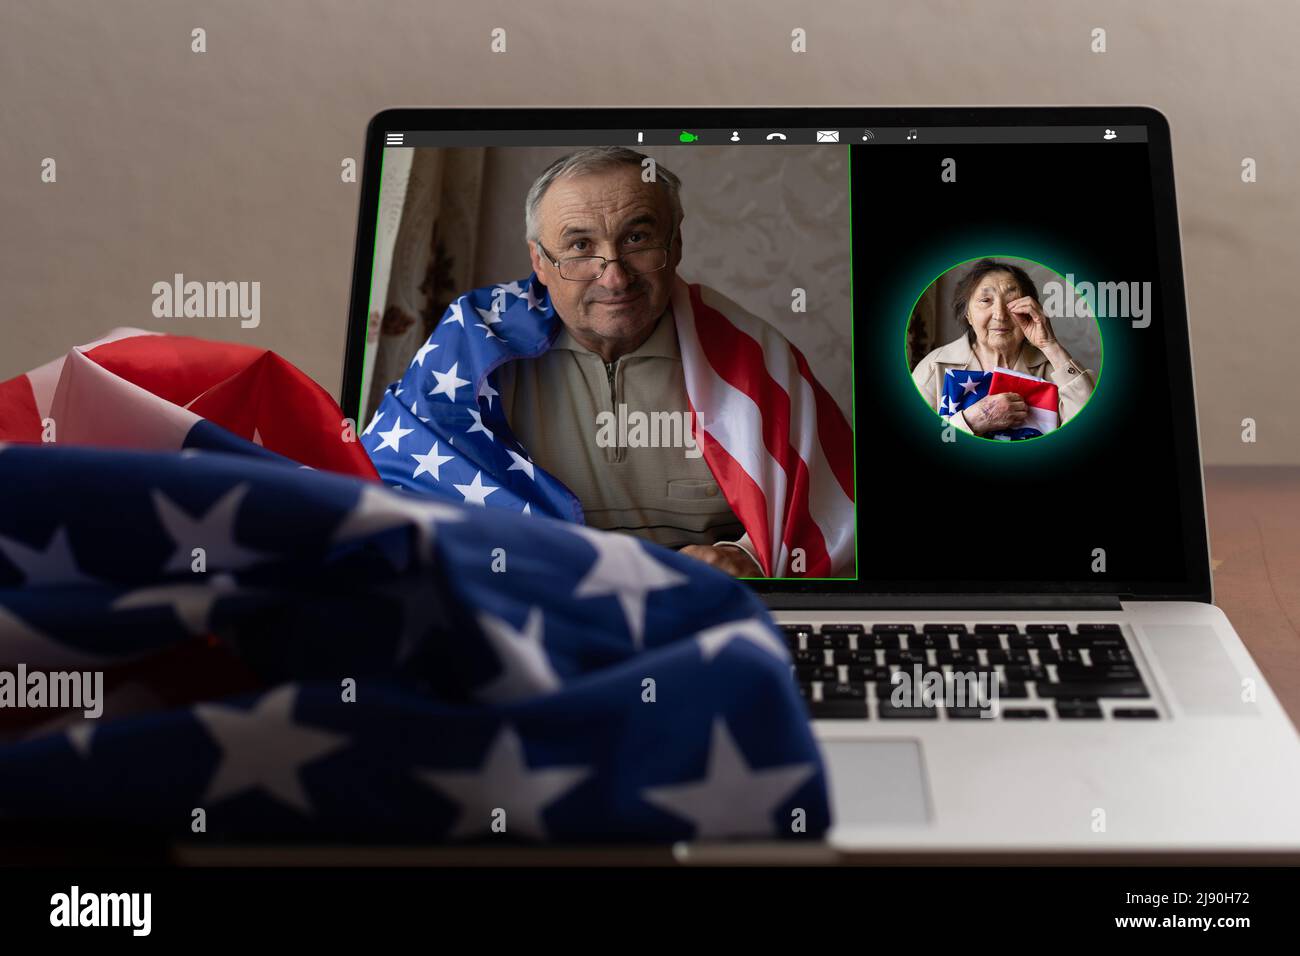 Usa video chat